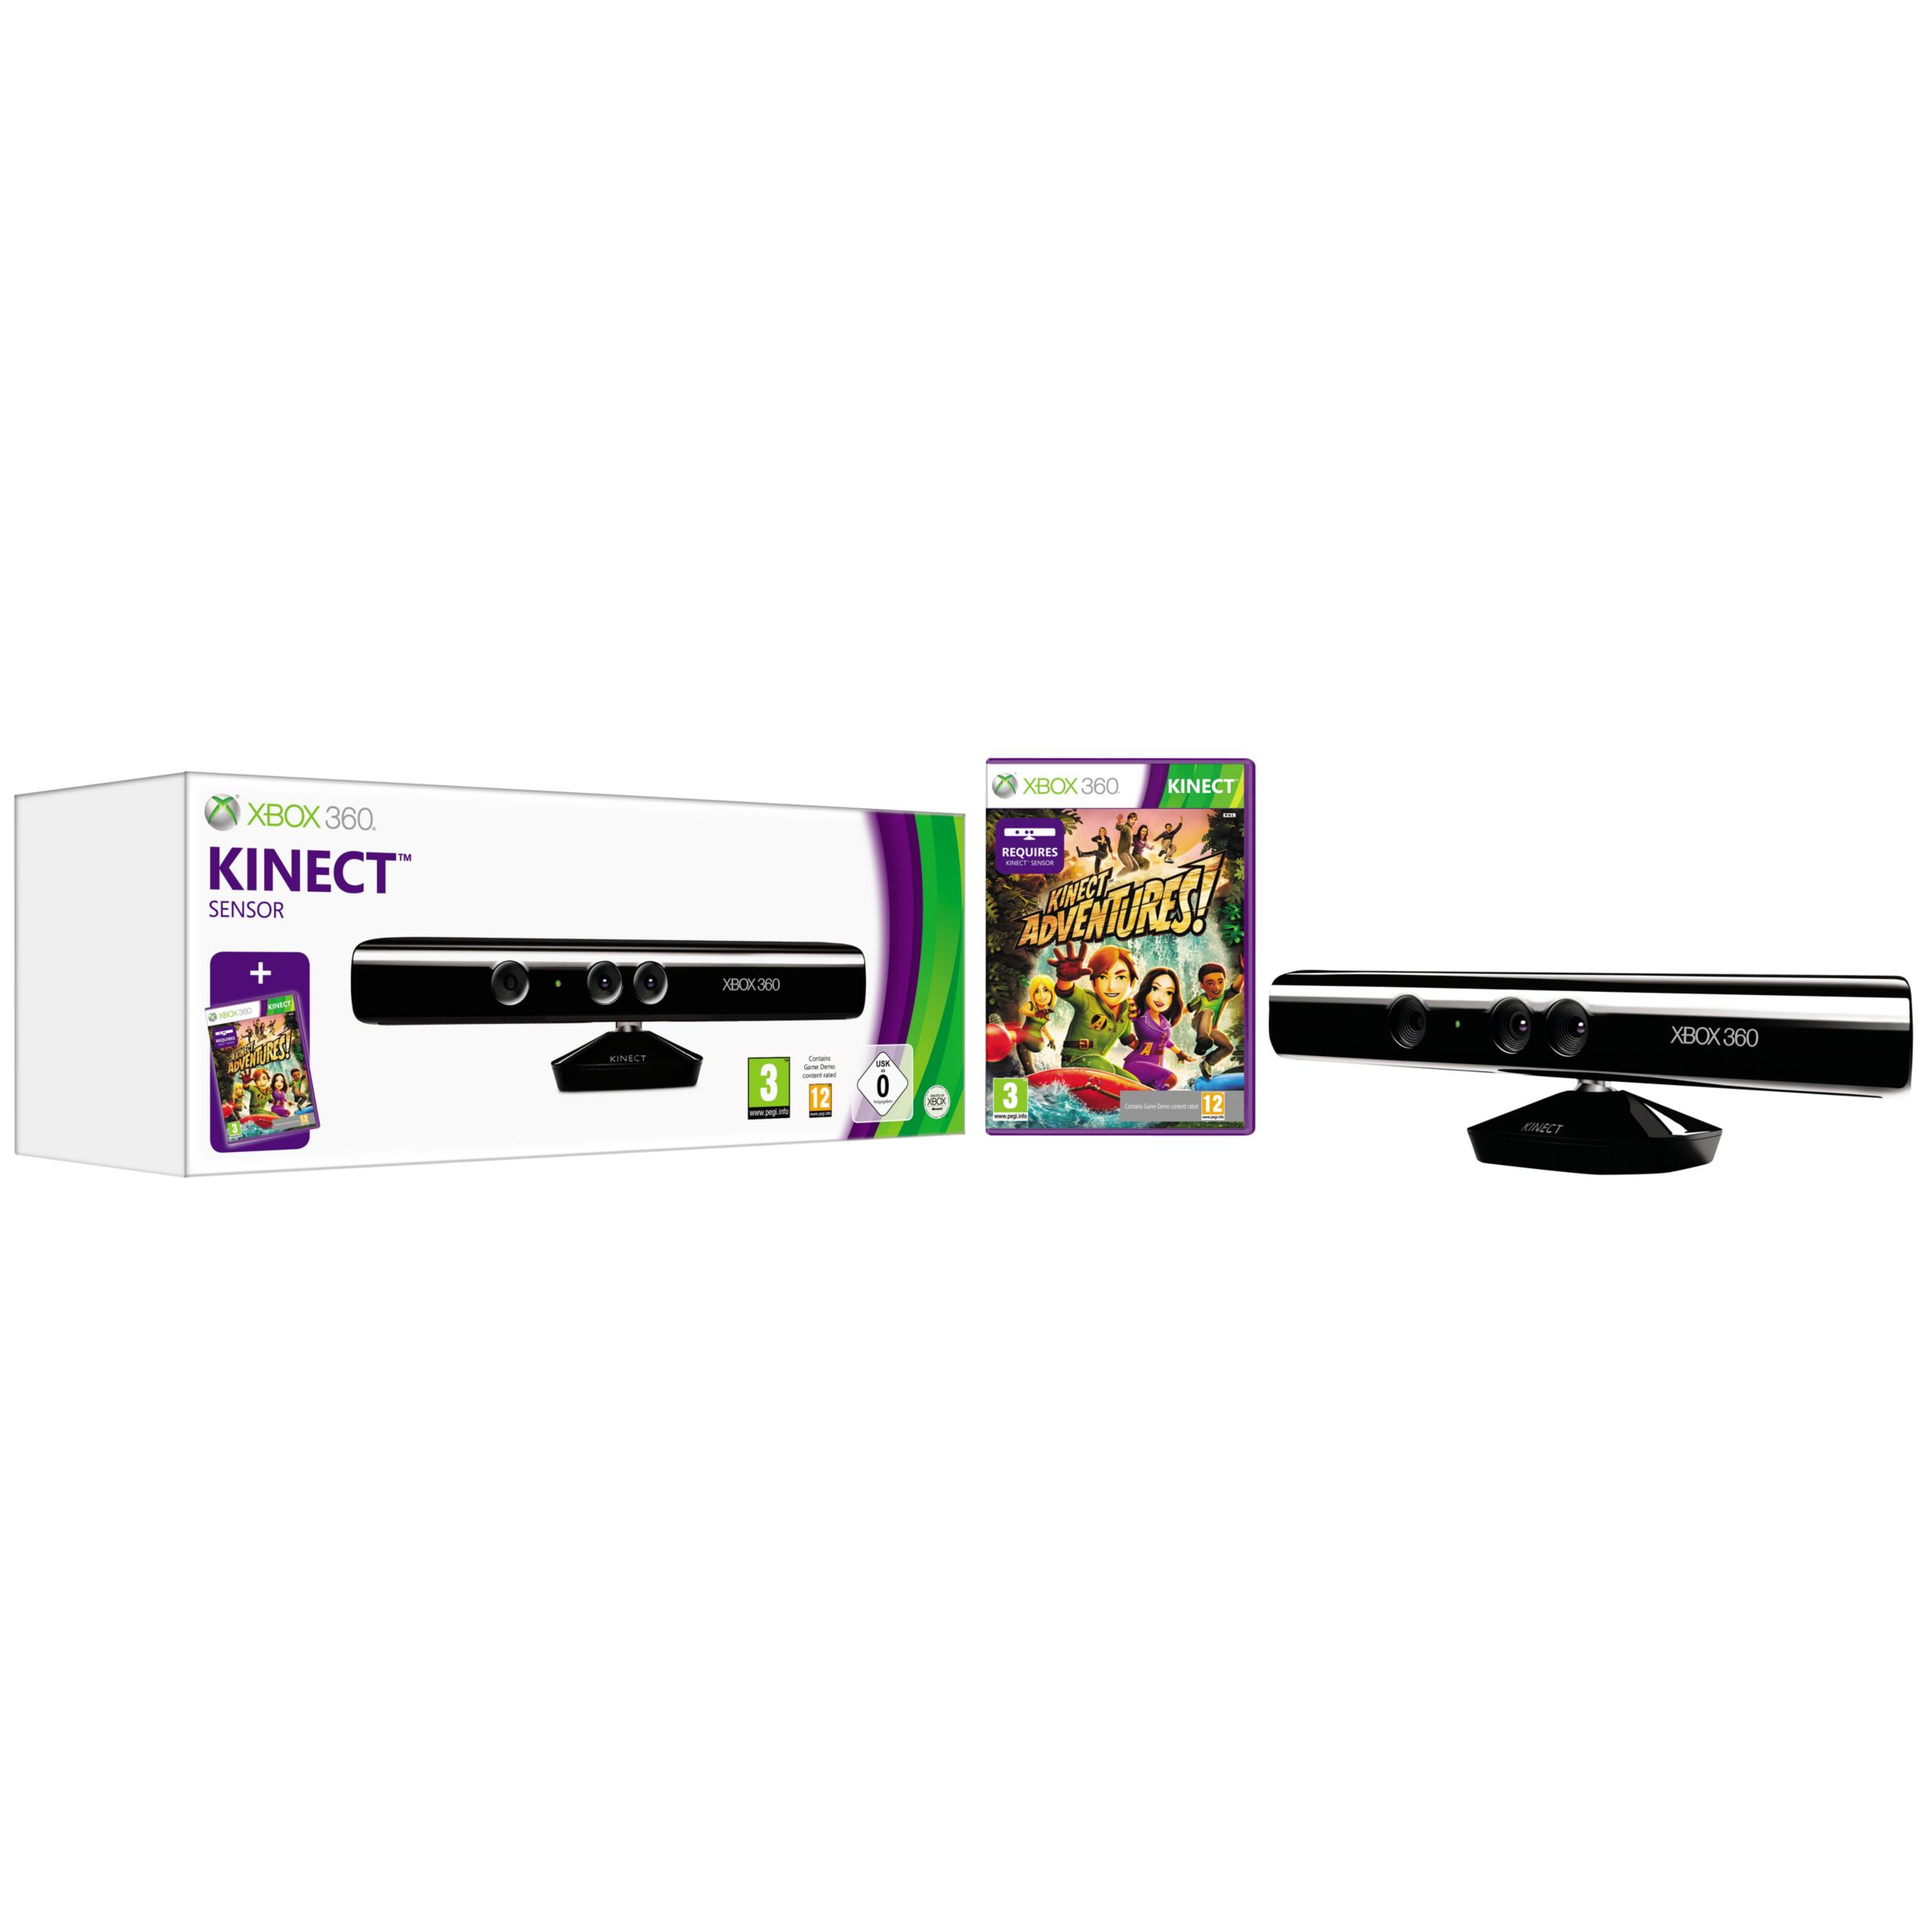 Microsoft Kinect Controller, Joyride & Dance Central for Xbox 360 at John Lewis